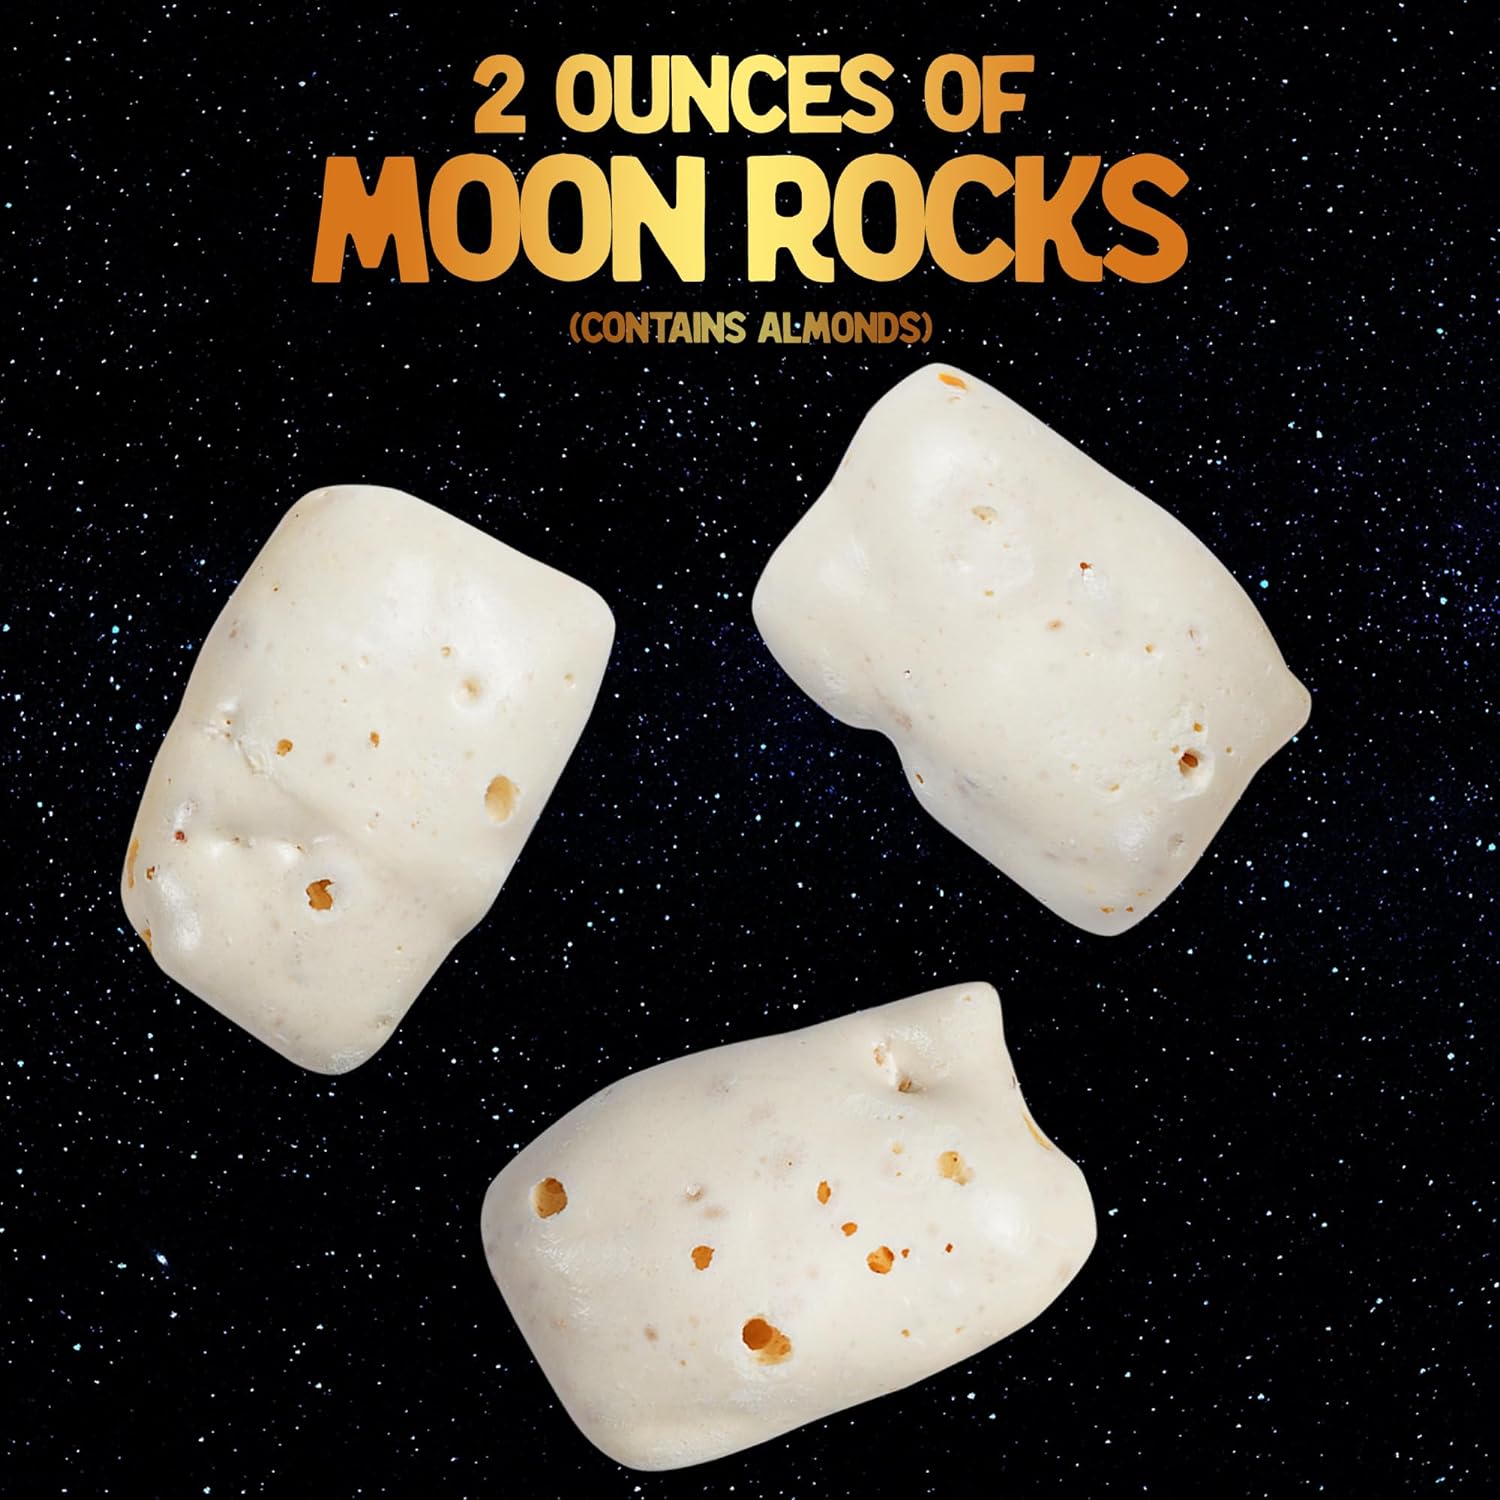 4 Pack Freeze Dried Candy Variety Pack - Cosmo Cubes, Moon Rocks, Sour Berry Cosmic Crunchies, Alien Tongues